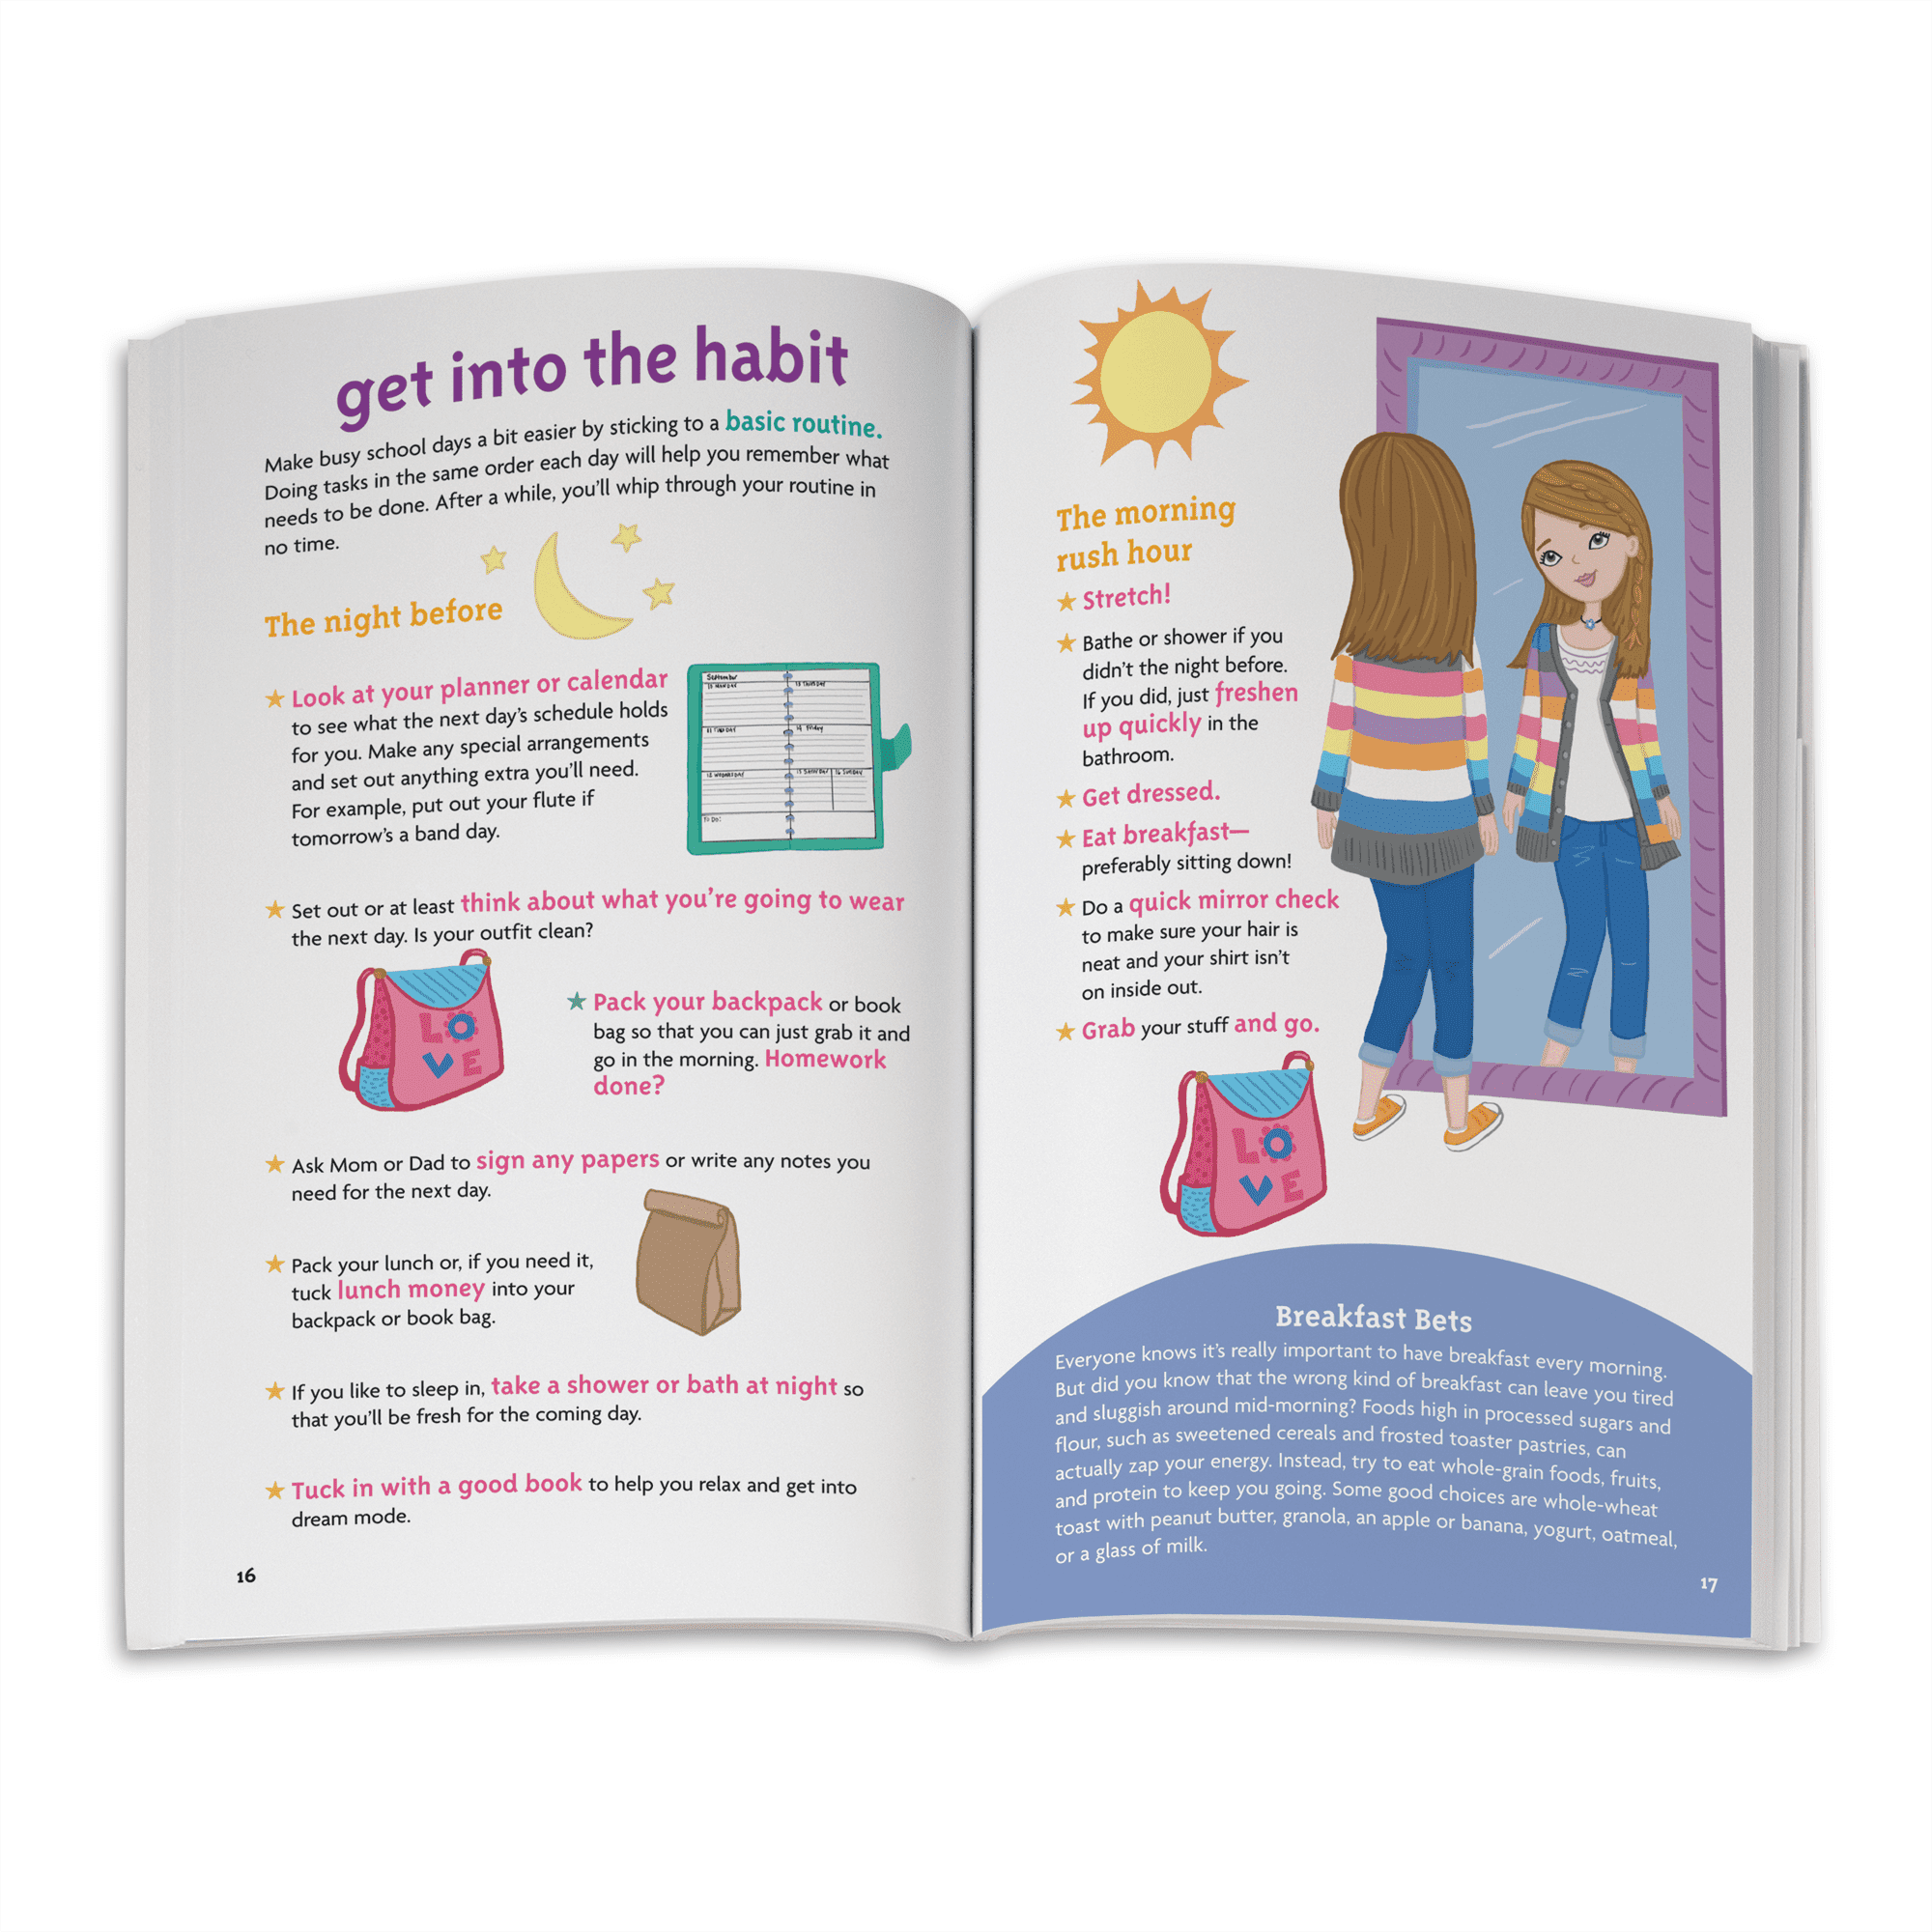 A Smart Girl’s Guide: Middle School